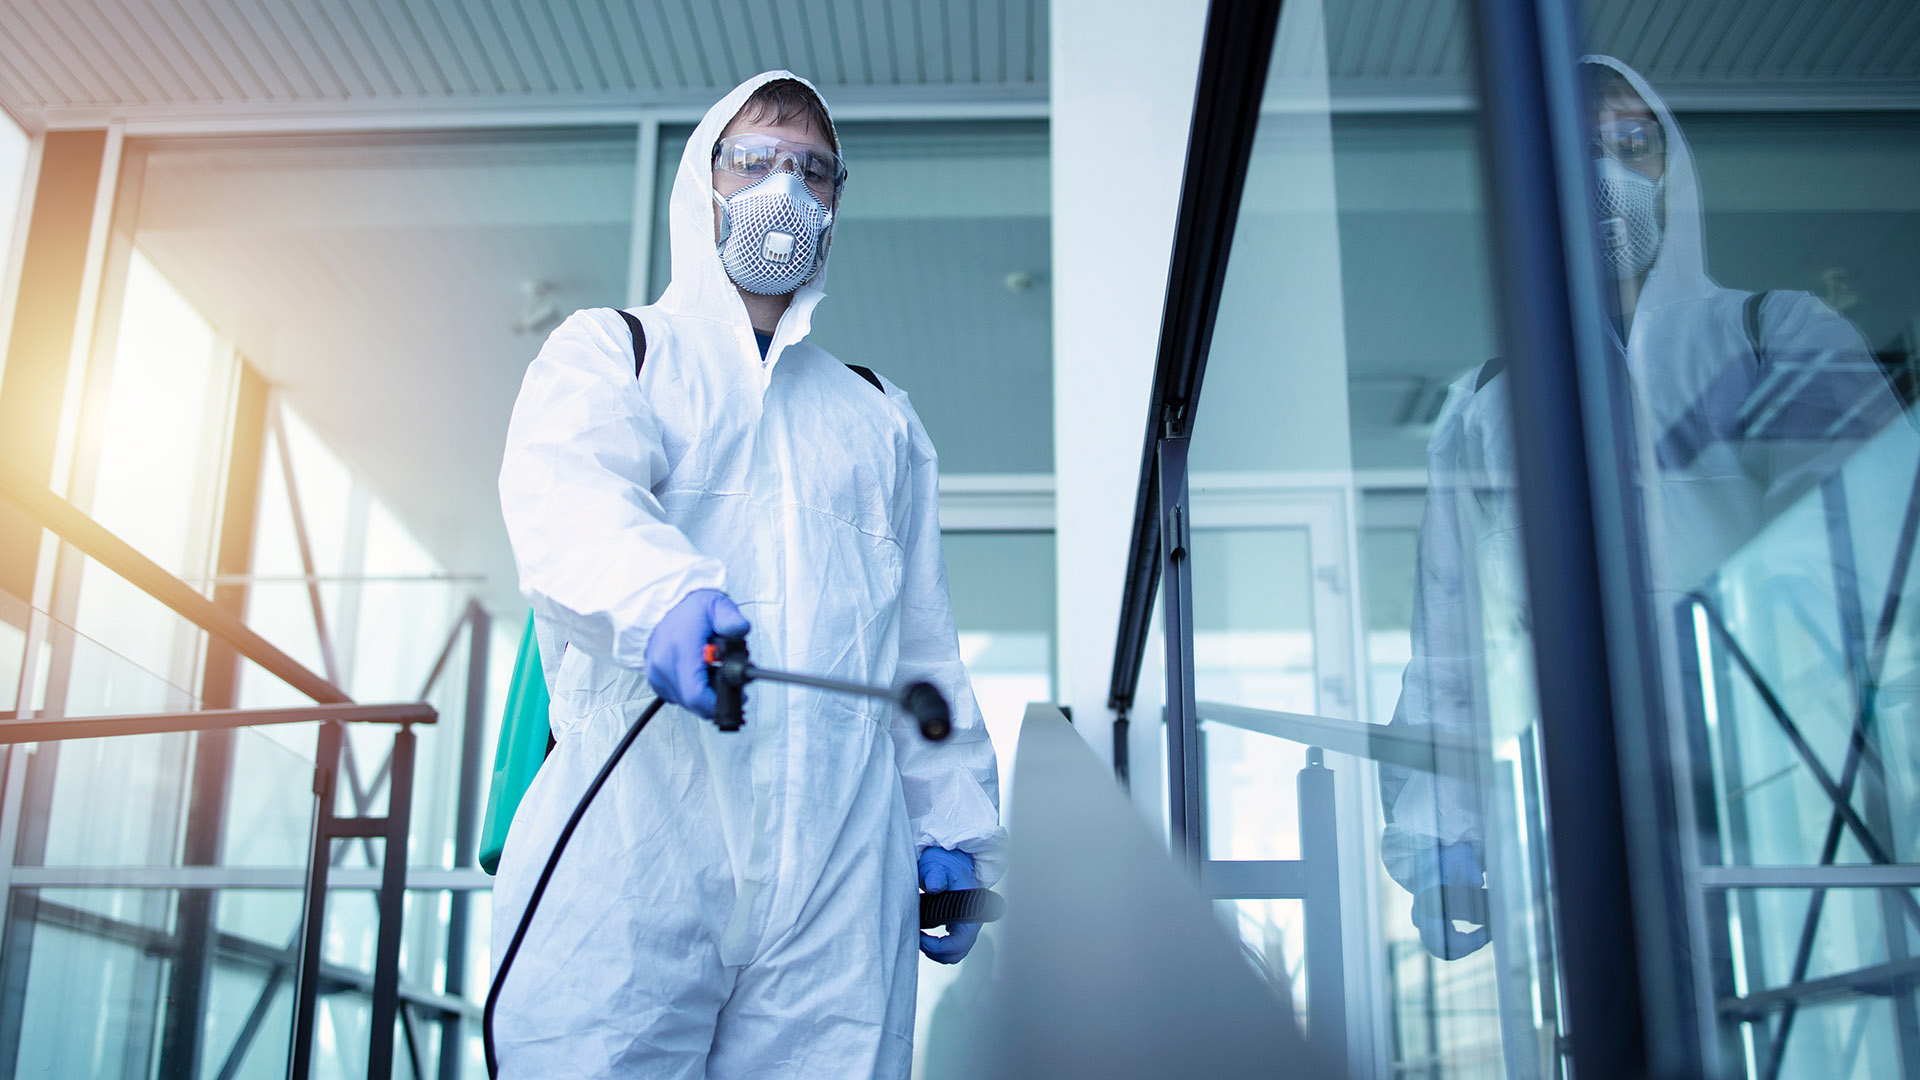 High Level Disinfection Services Market